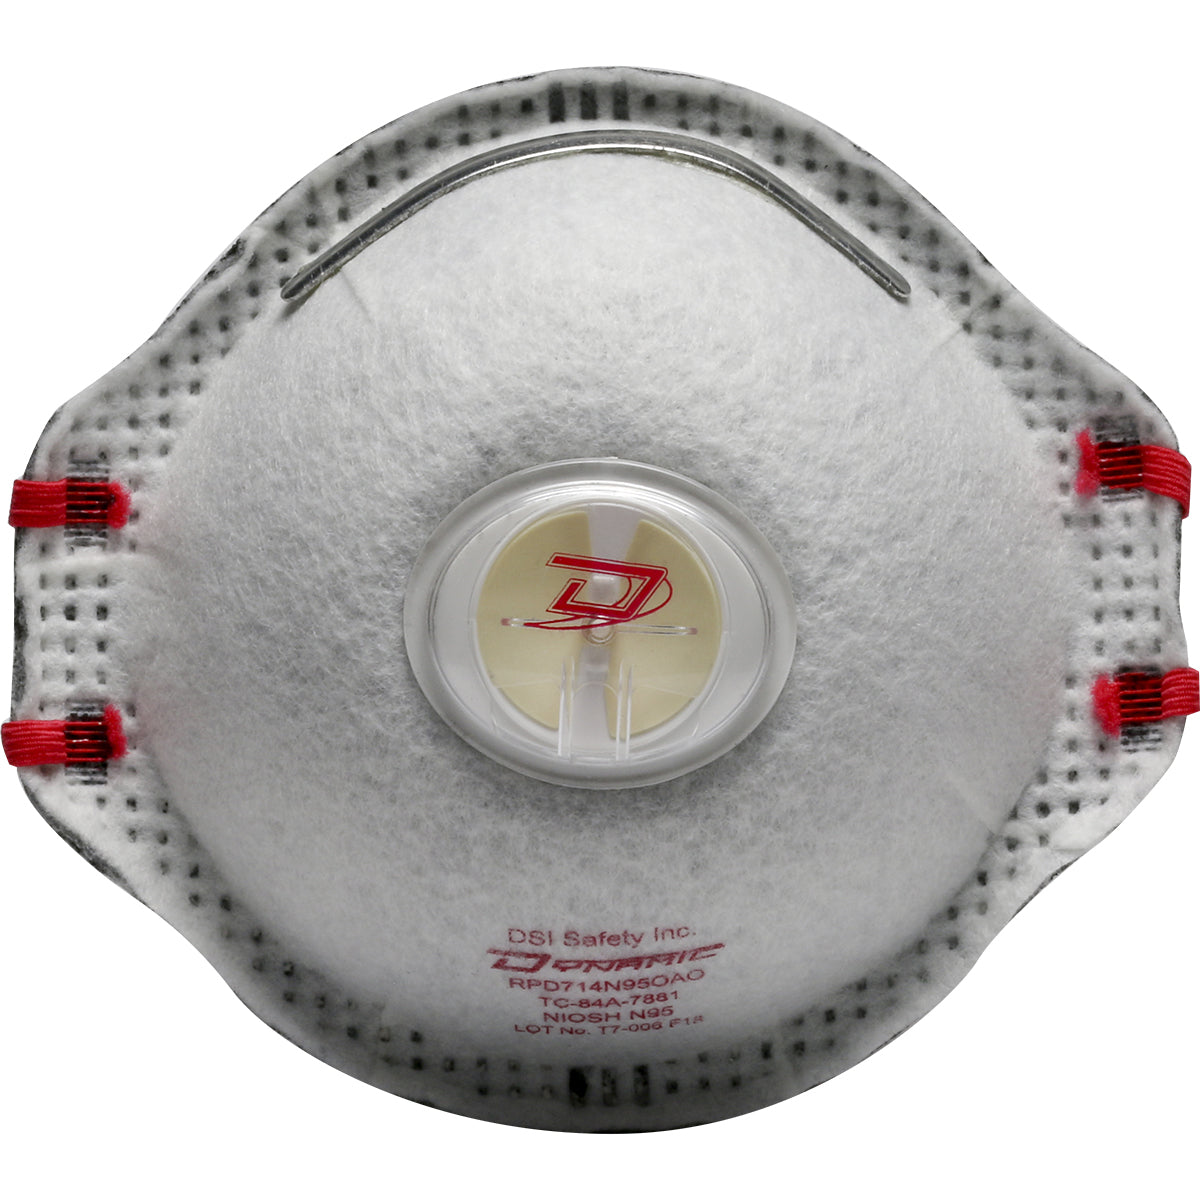 Dynamic 270-RPD714N95OAO Deluxe N95 Disposable Respirator with Butterfly Valve, Nuisance Level for OV-AG-Ozone and FR Material - 10 Pack